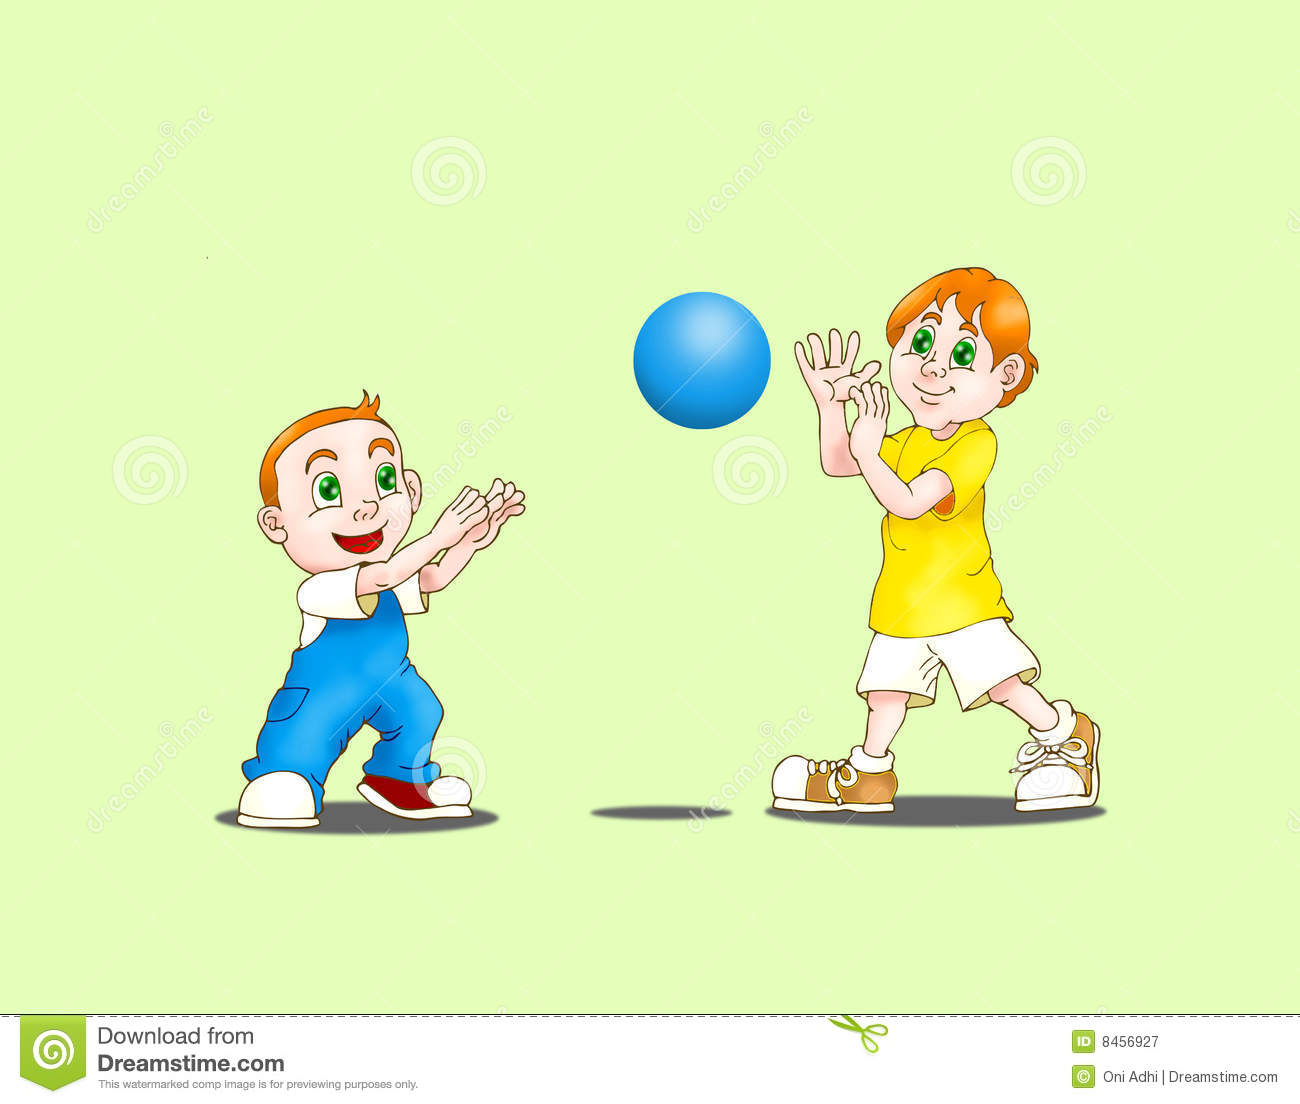     Cute Happy Boys With A Blue Soccer Ballisolated  Smilling Together